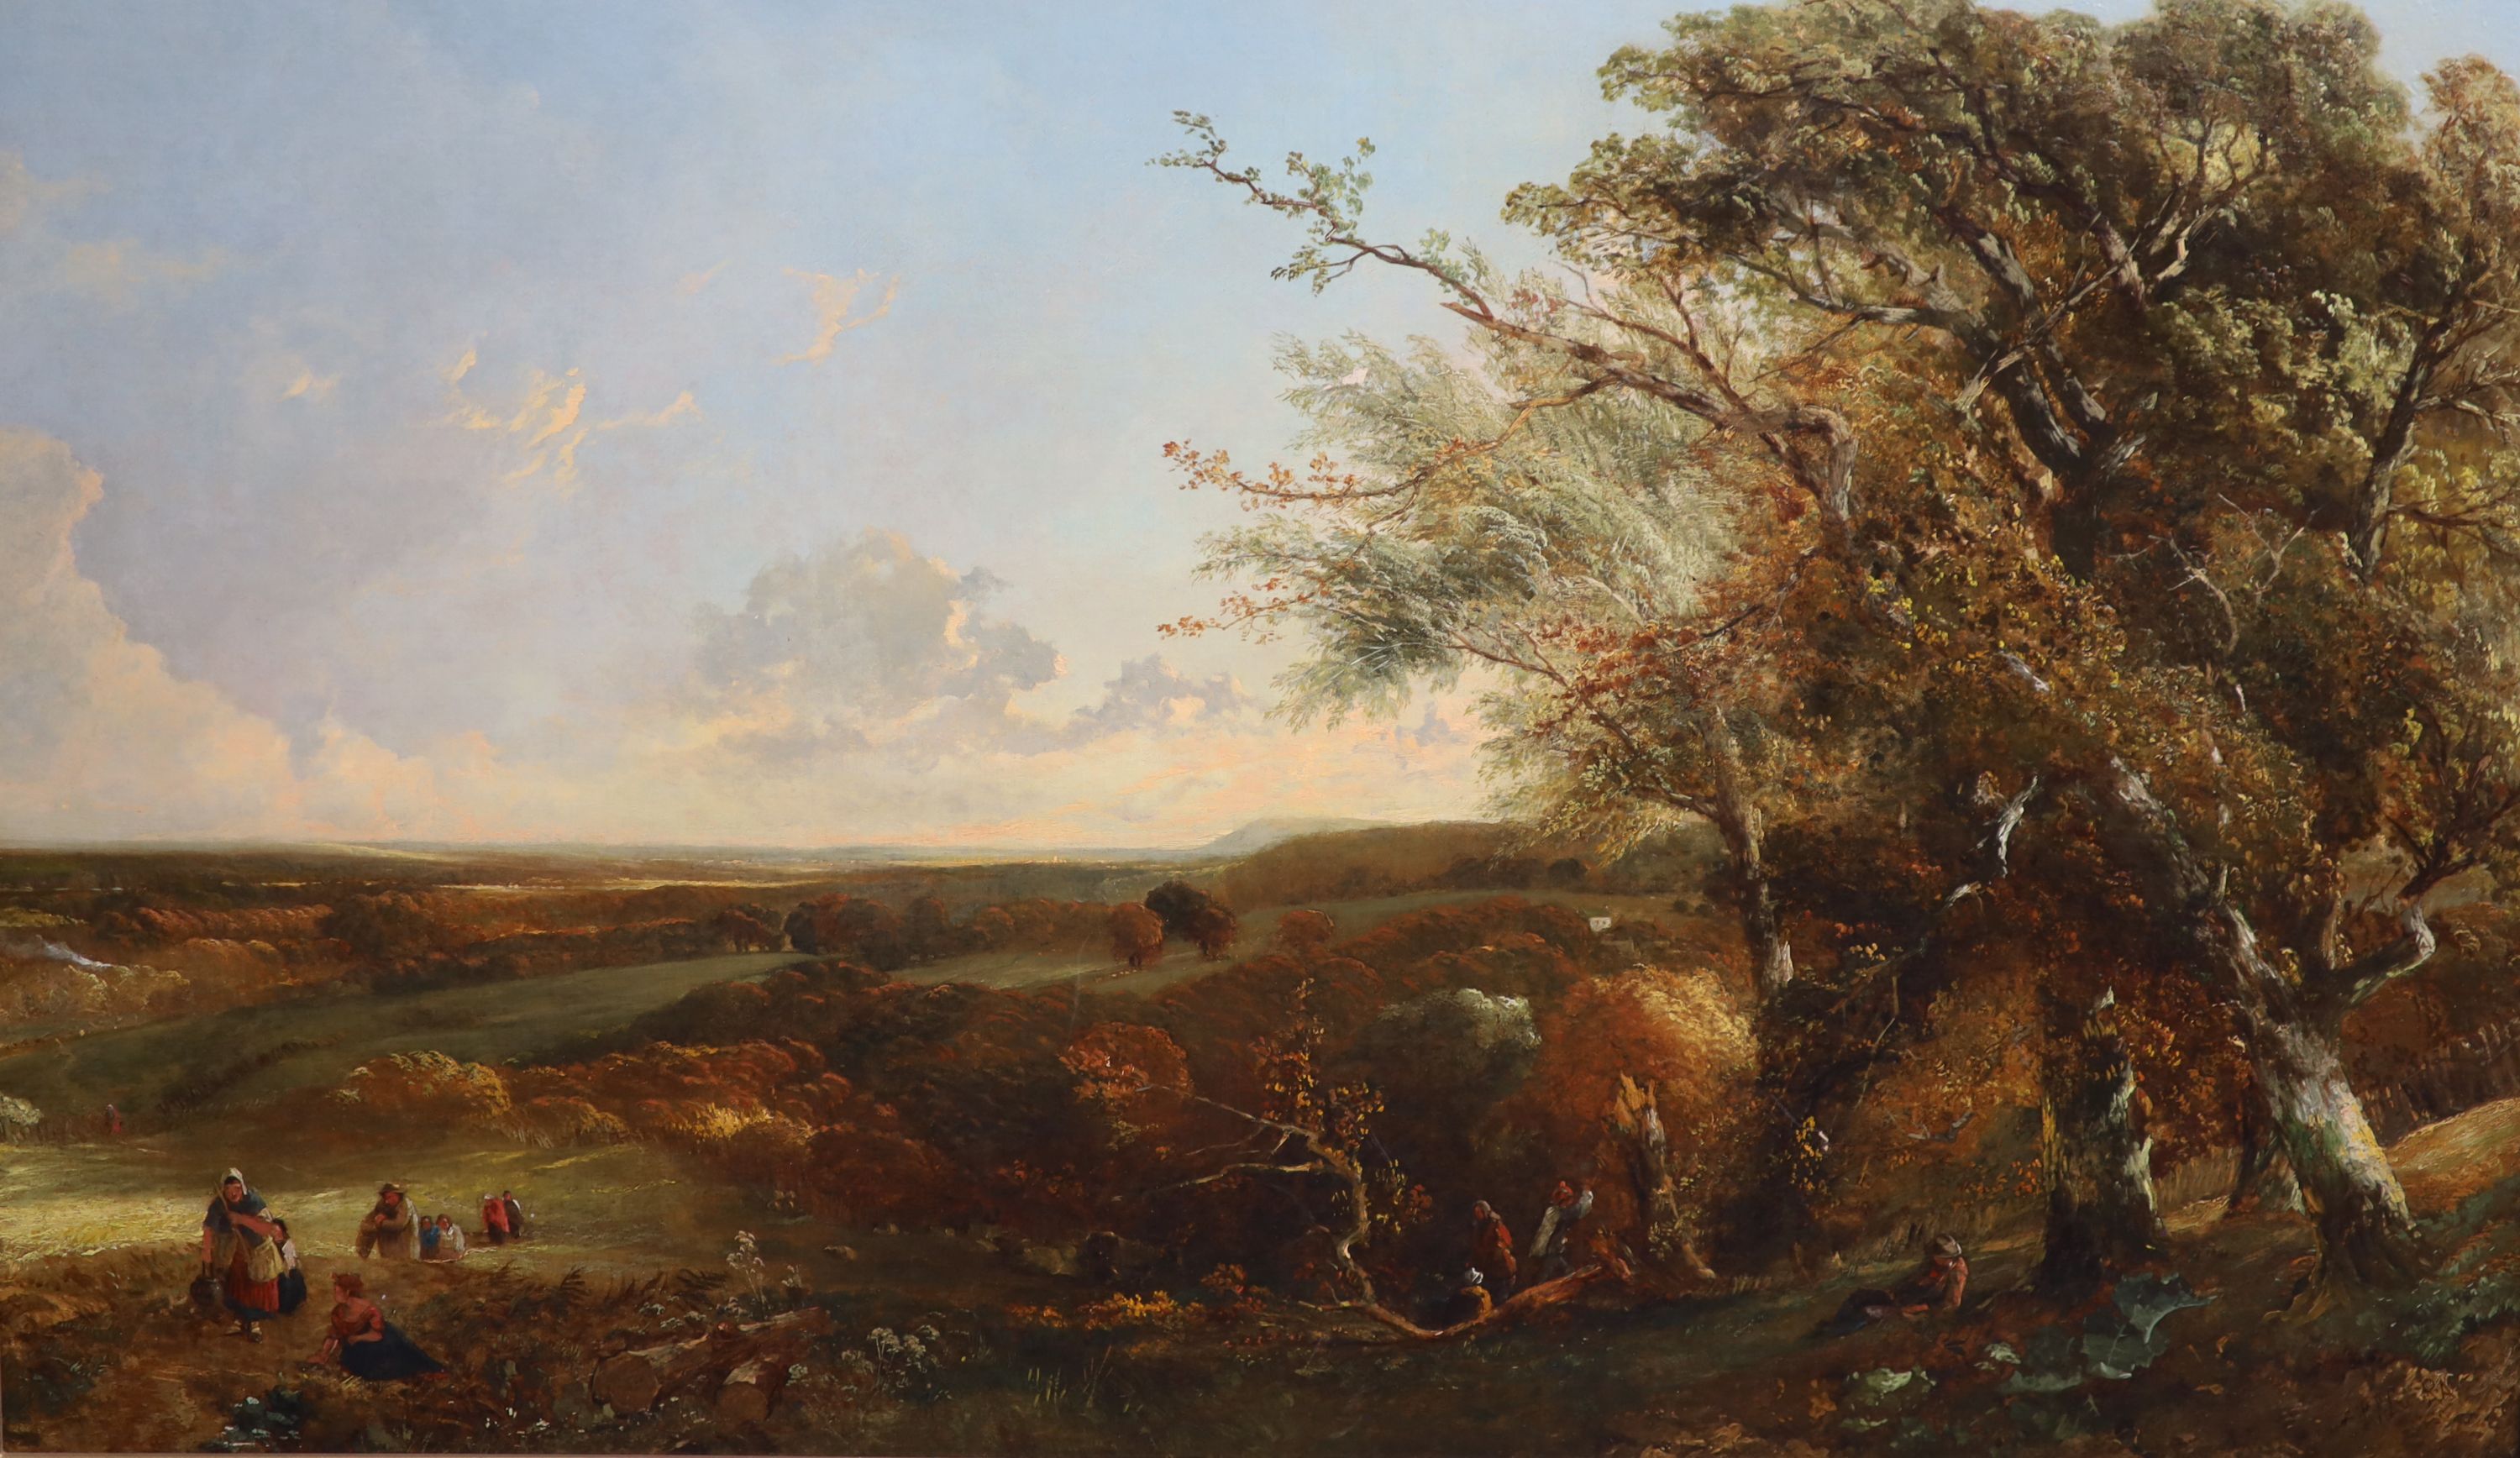 Frank Richard Lee RA (1798-1879), Extensive landscape with figures in woodland and coming home from the fields, oil on canvas, 55 x 93cm